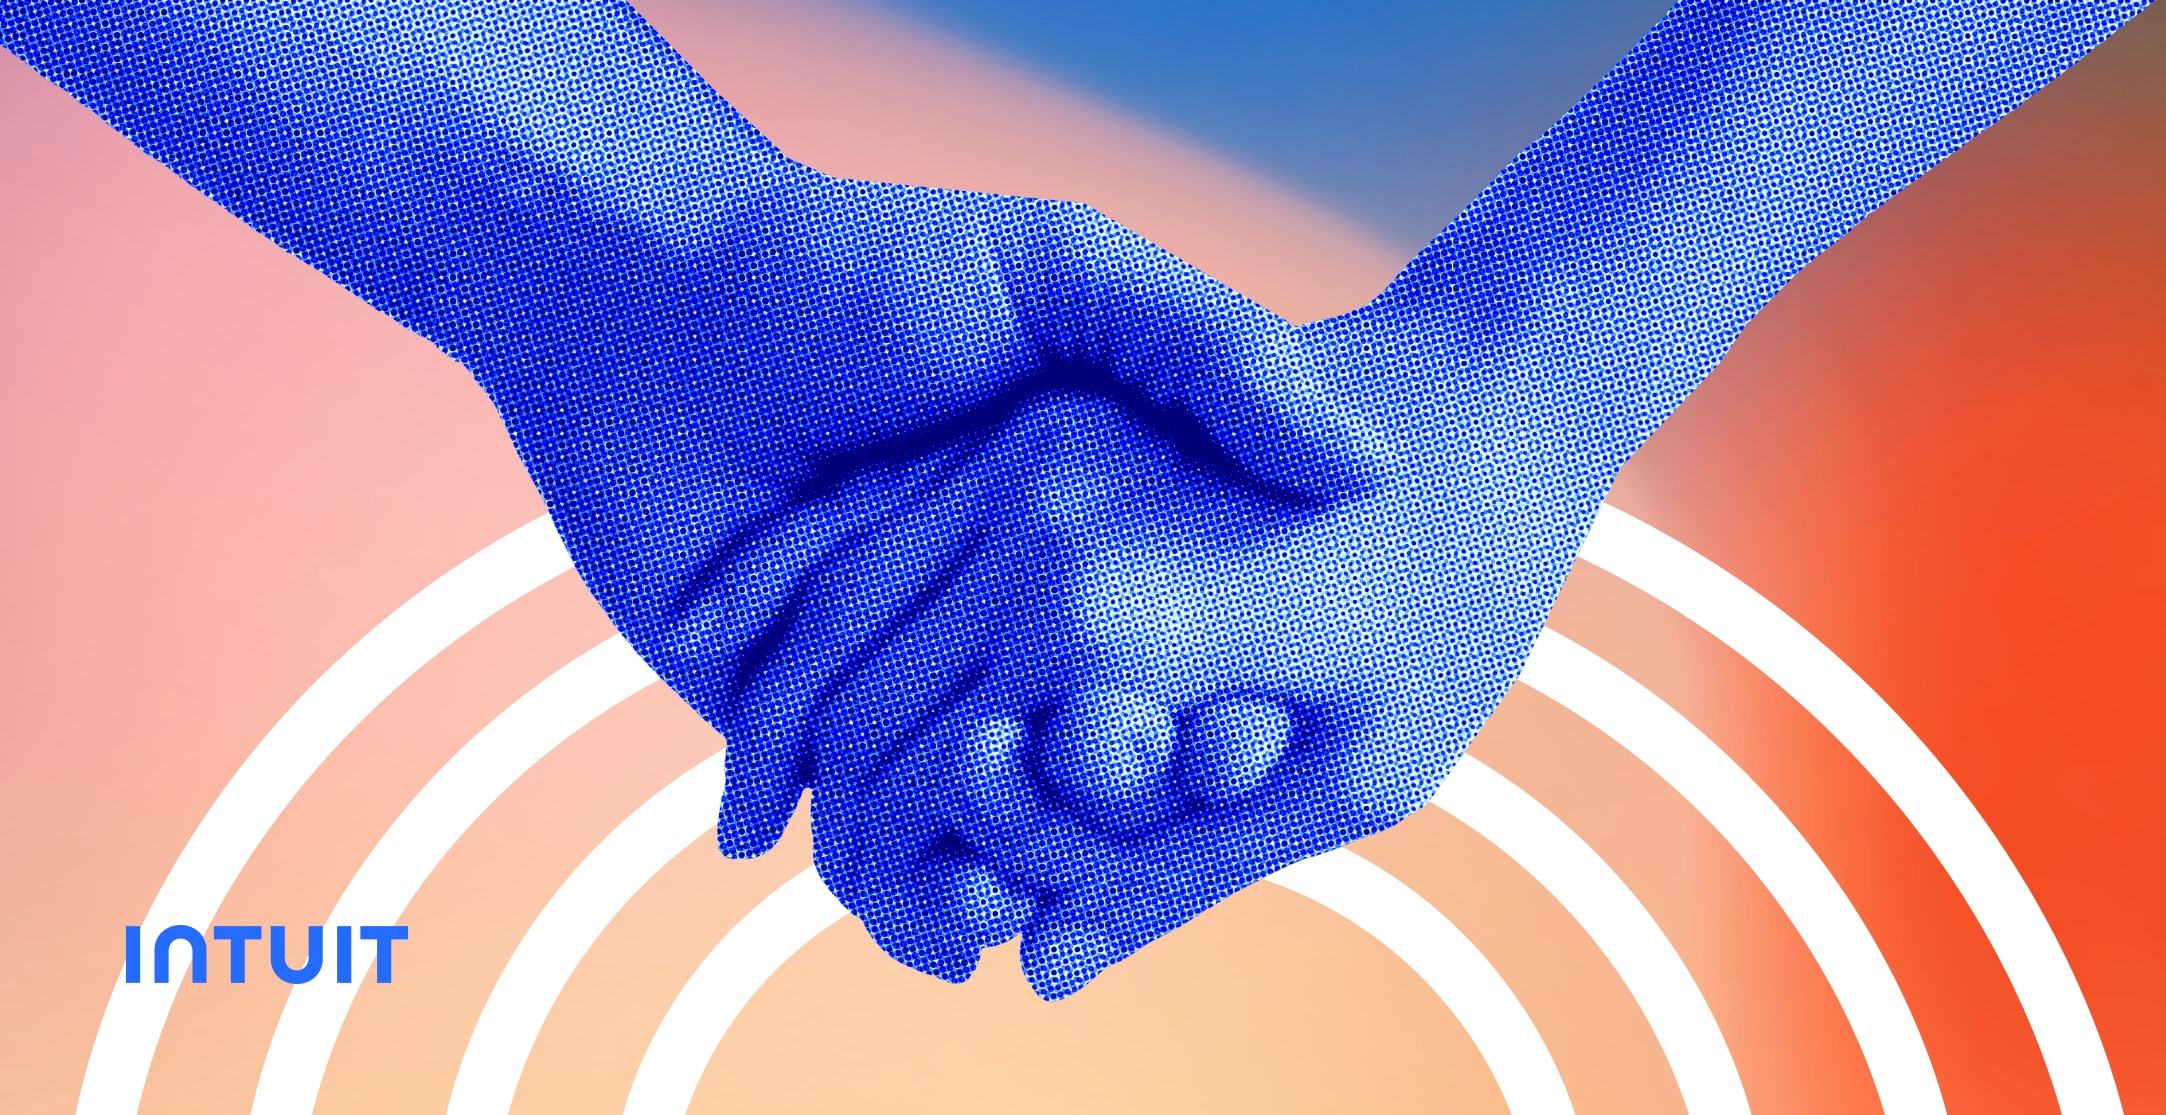 An illustrative image of two blue arms holding hands.